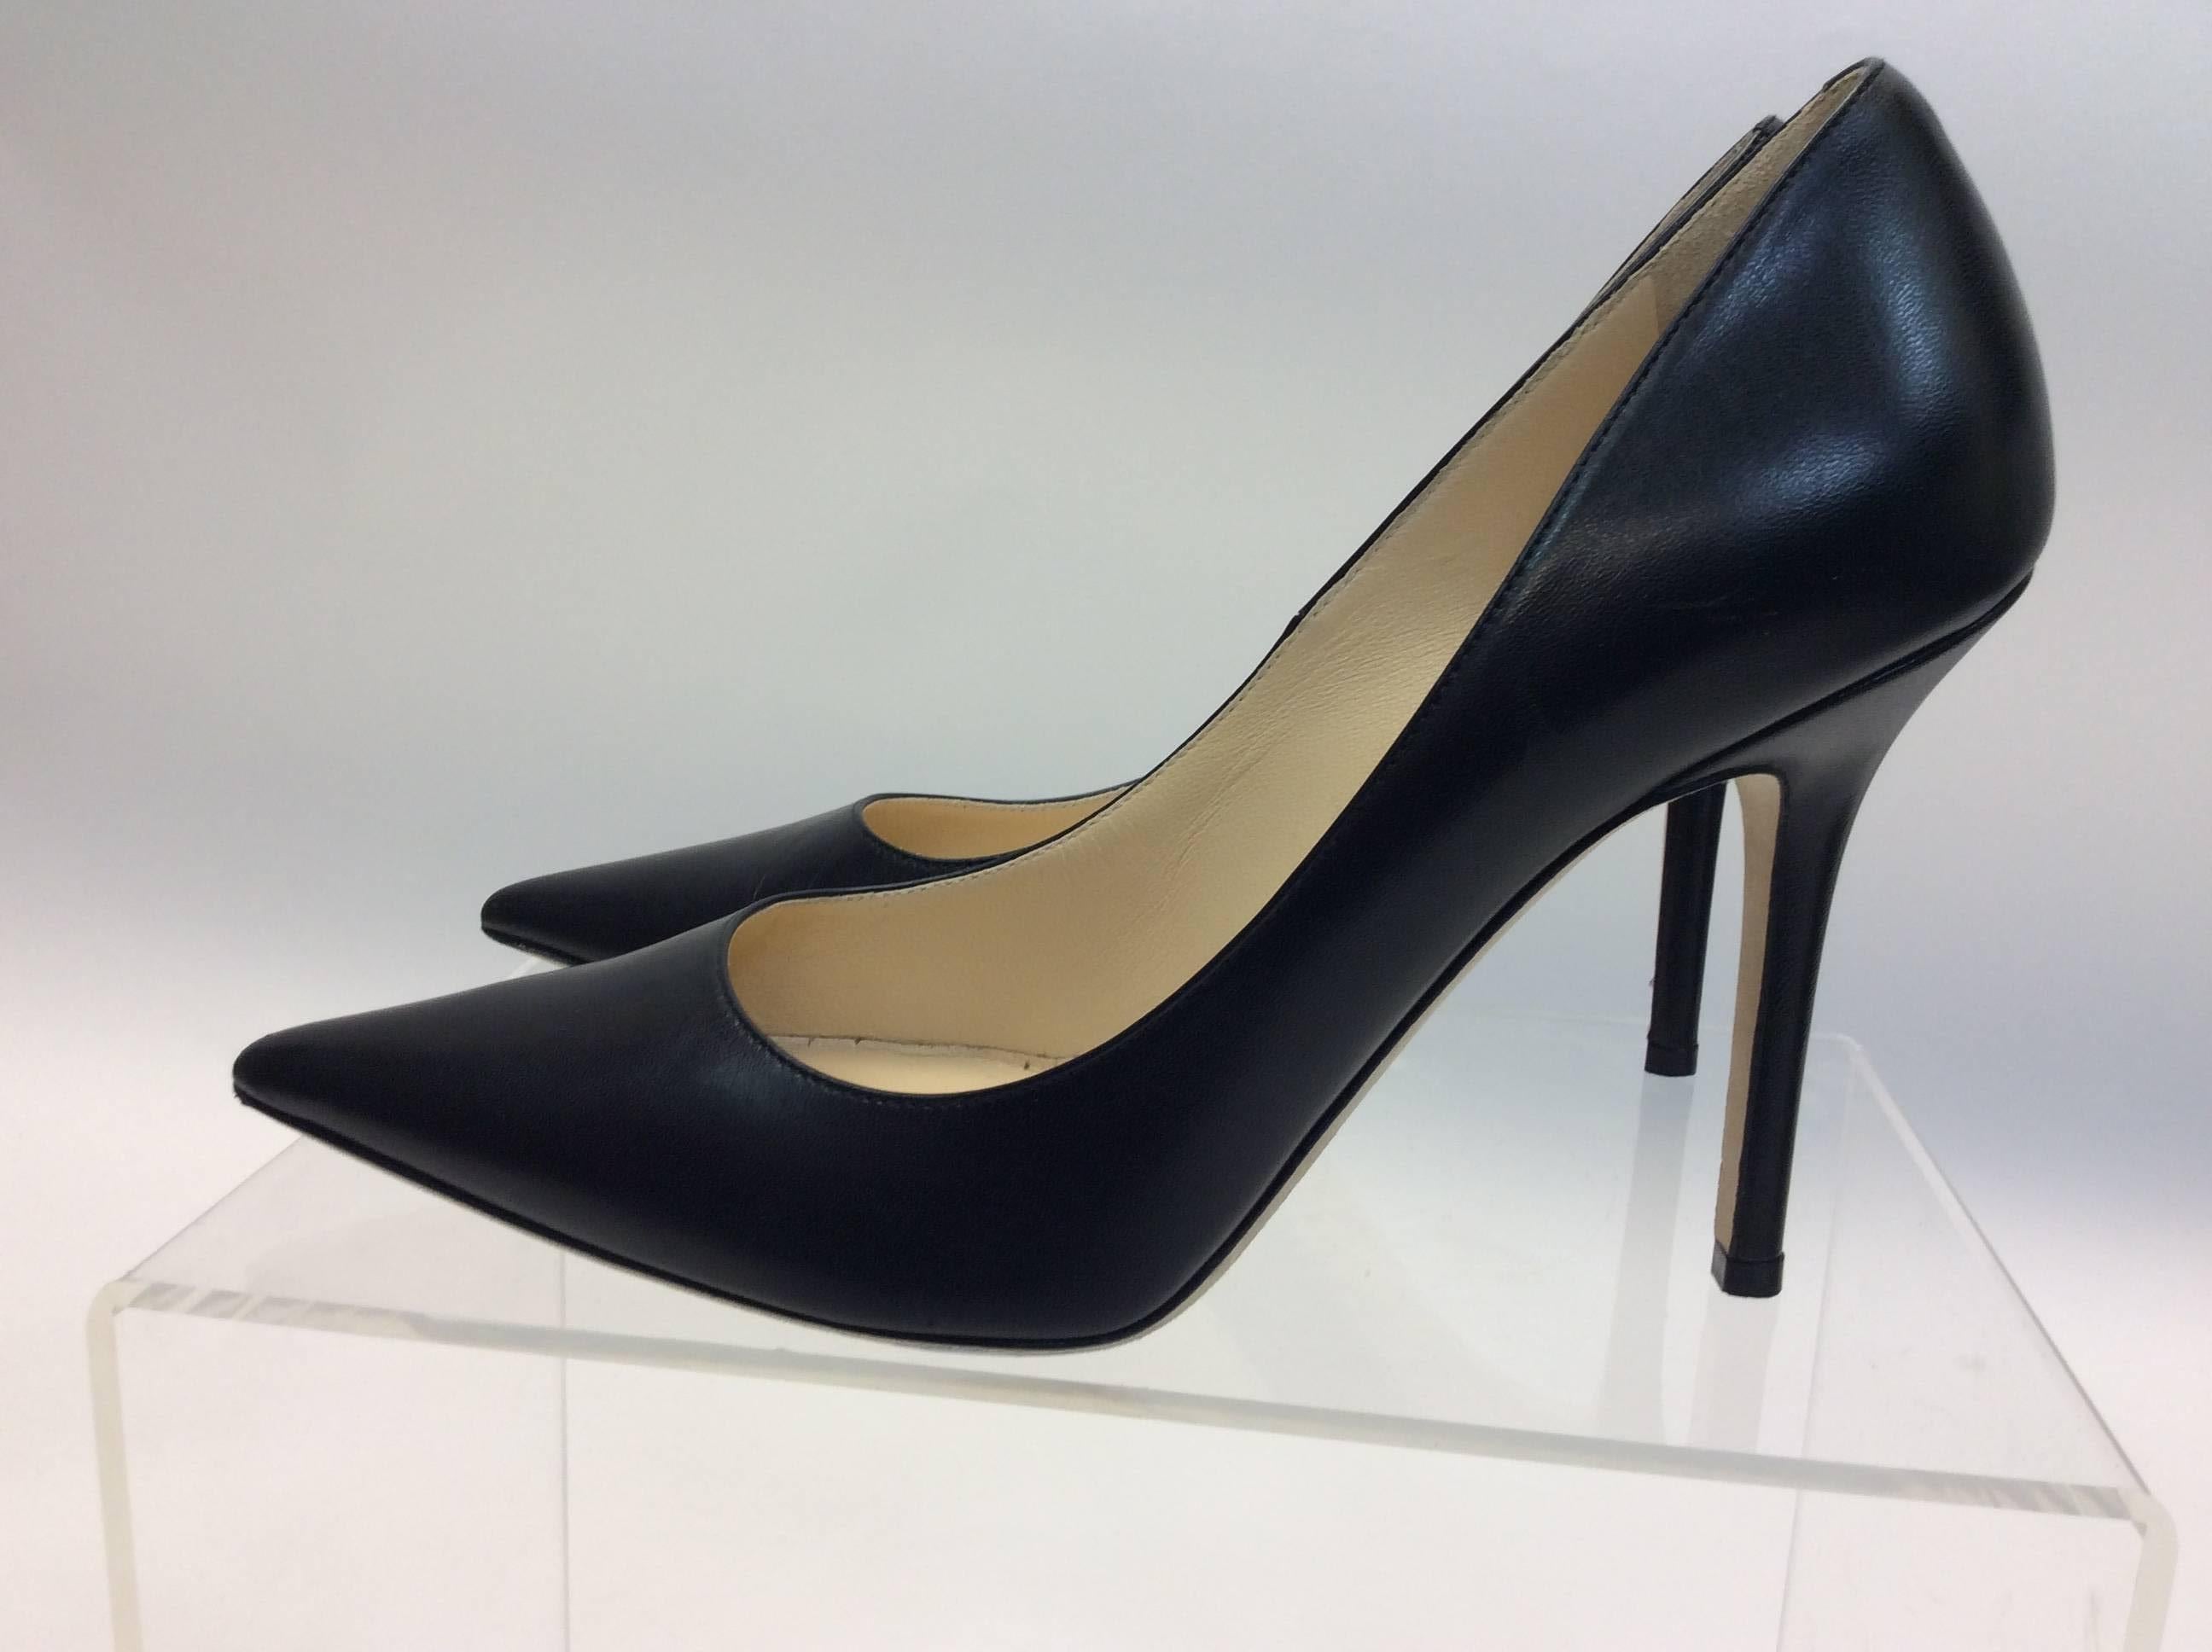 Jimmy Choo Black Leather Heels
$250
Made in Italy
Size 37
4